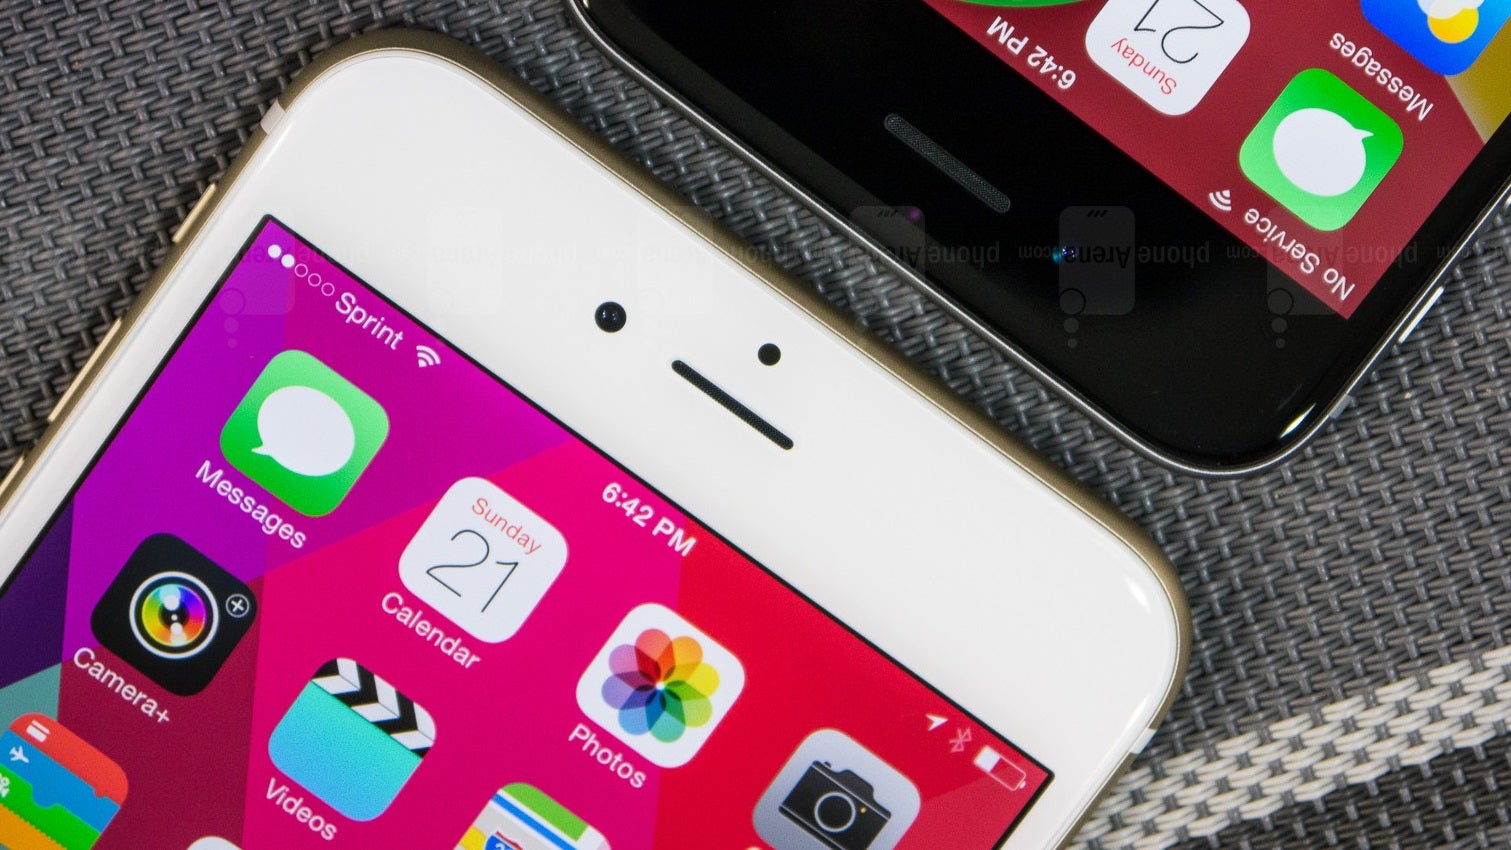 Ming-Chi Kuo: Upcoming iPhone 6s and 6s Plus will gain 5MP front camera upgrades